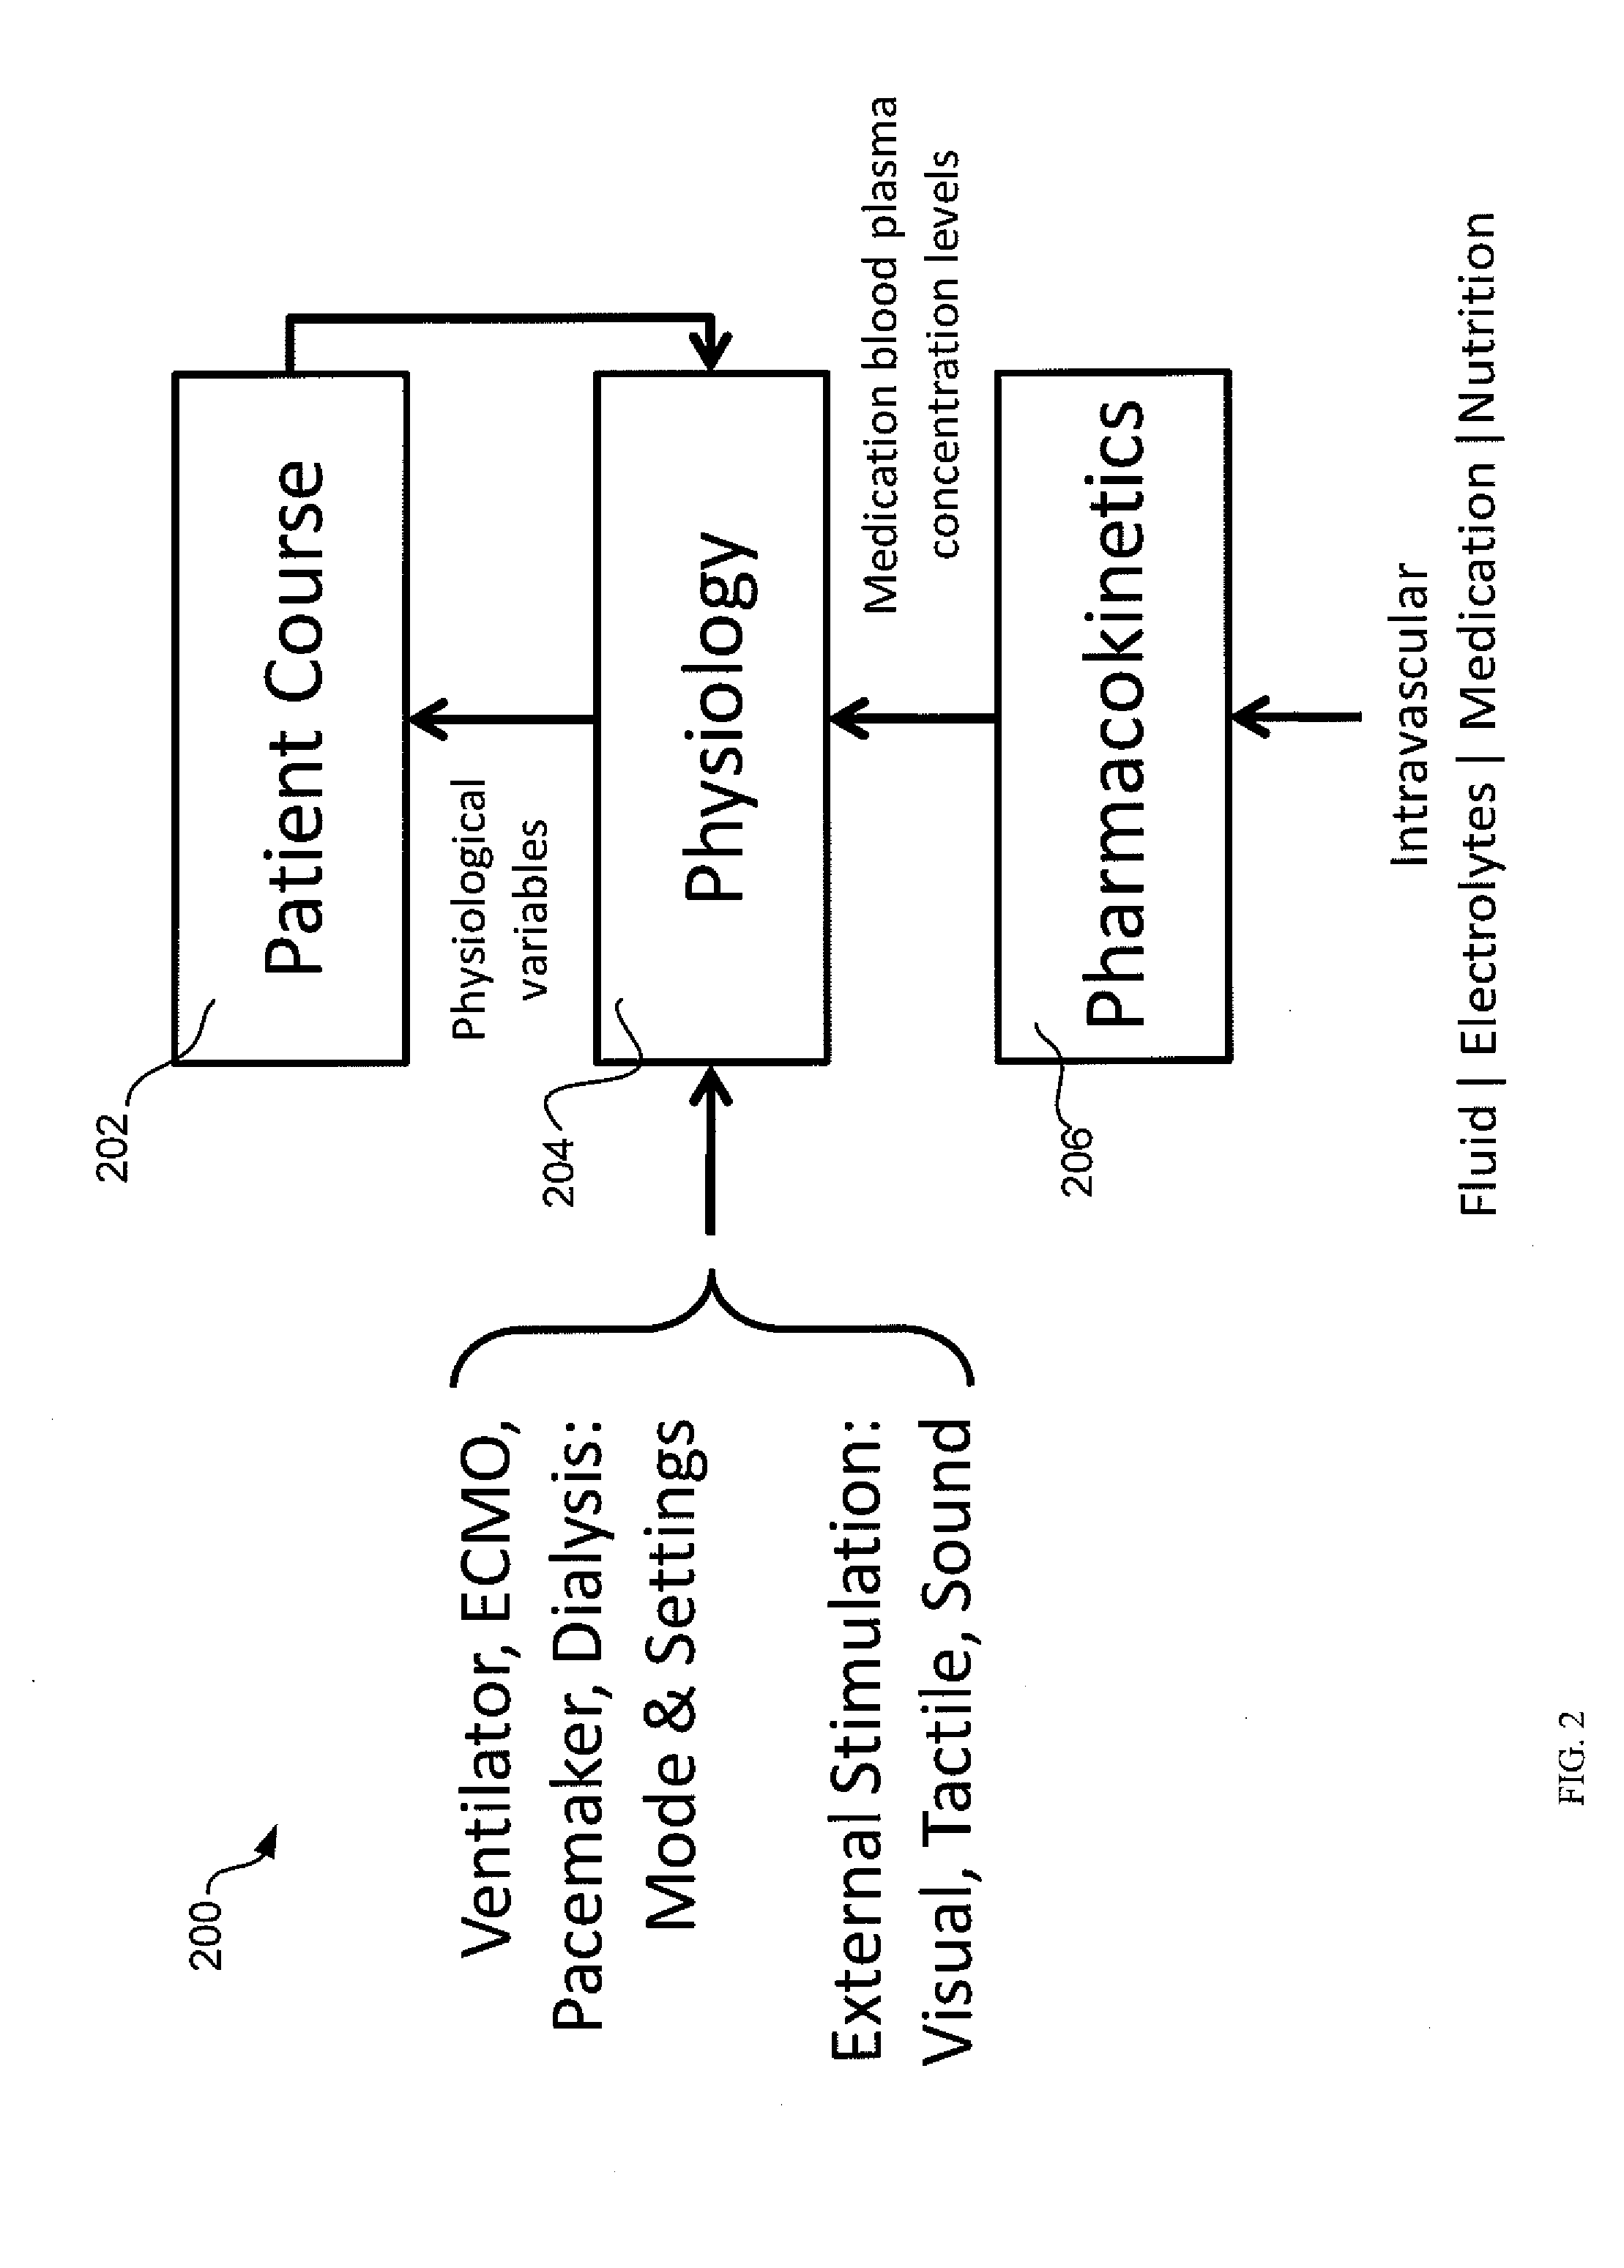 Systems and methods for optimizing medical care through data monitoring and feedback treatment